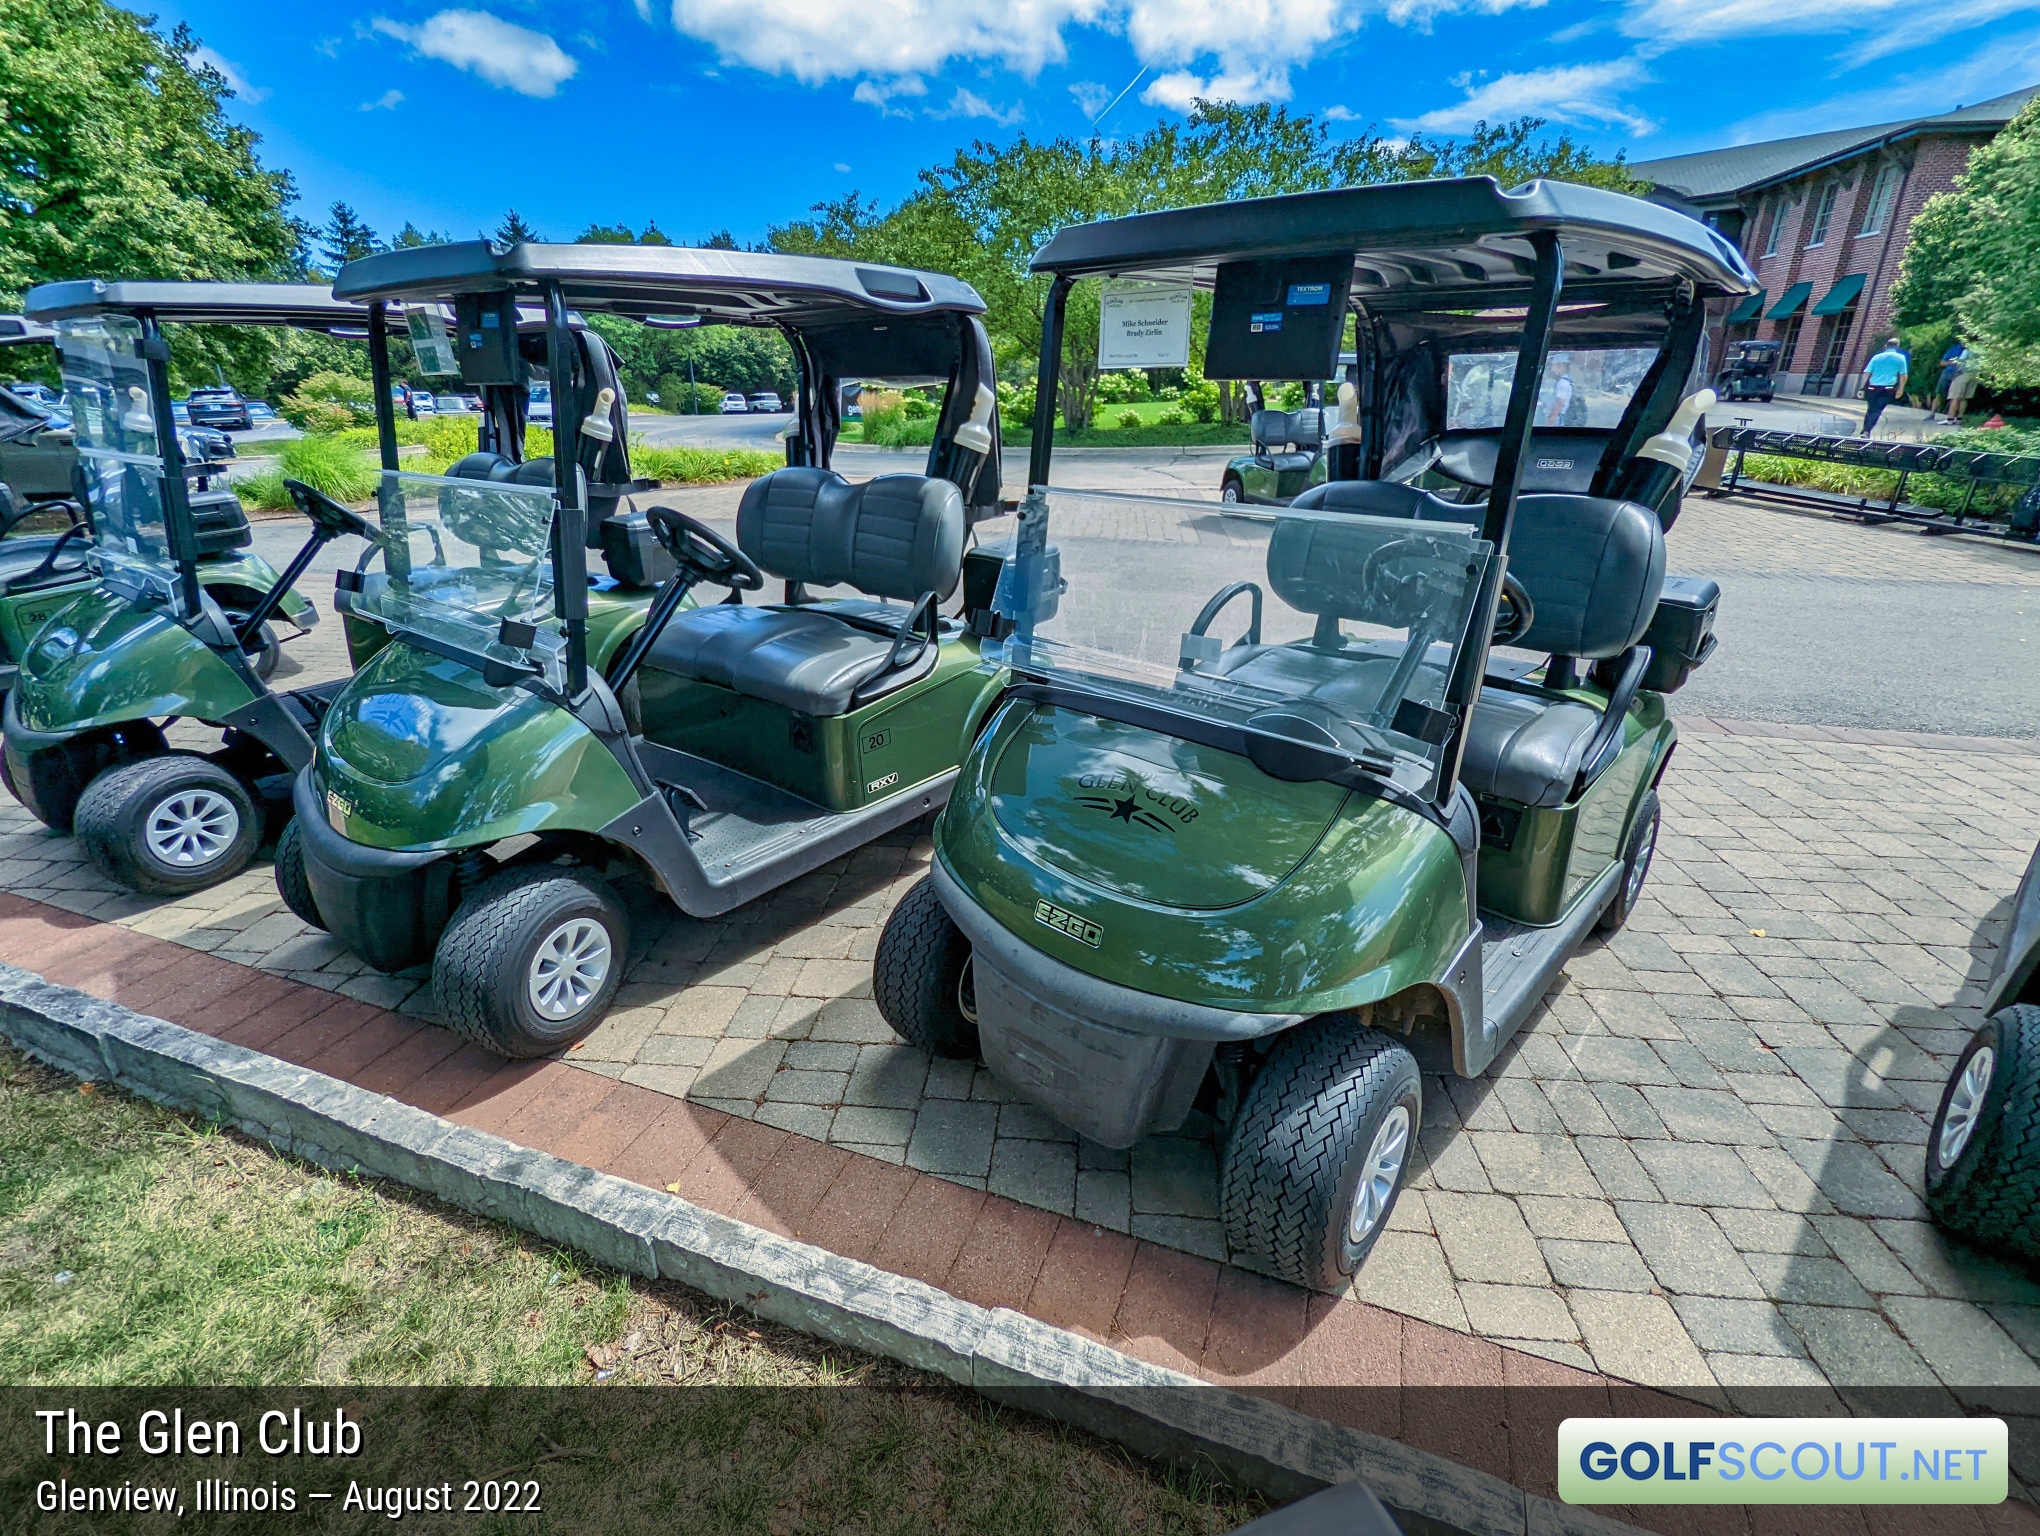 Photo of the golf carts at The Glen Club in Glenview, Illinois. 